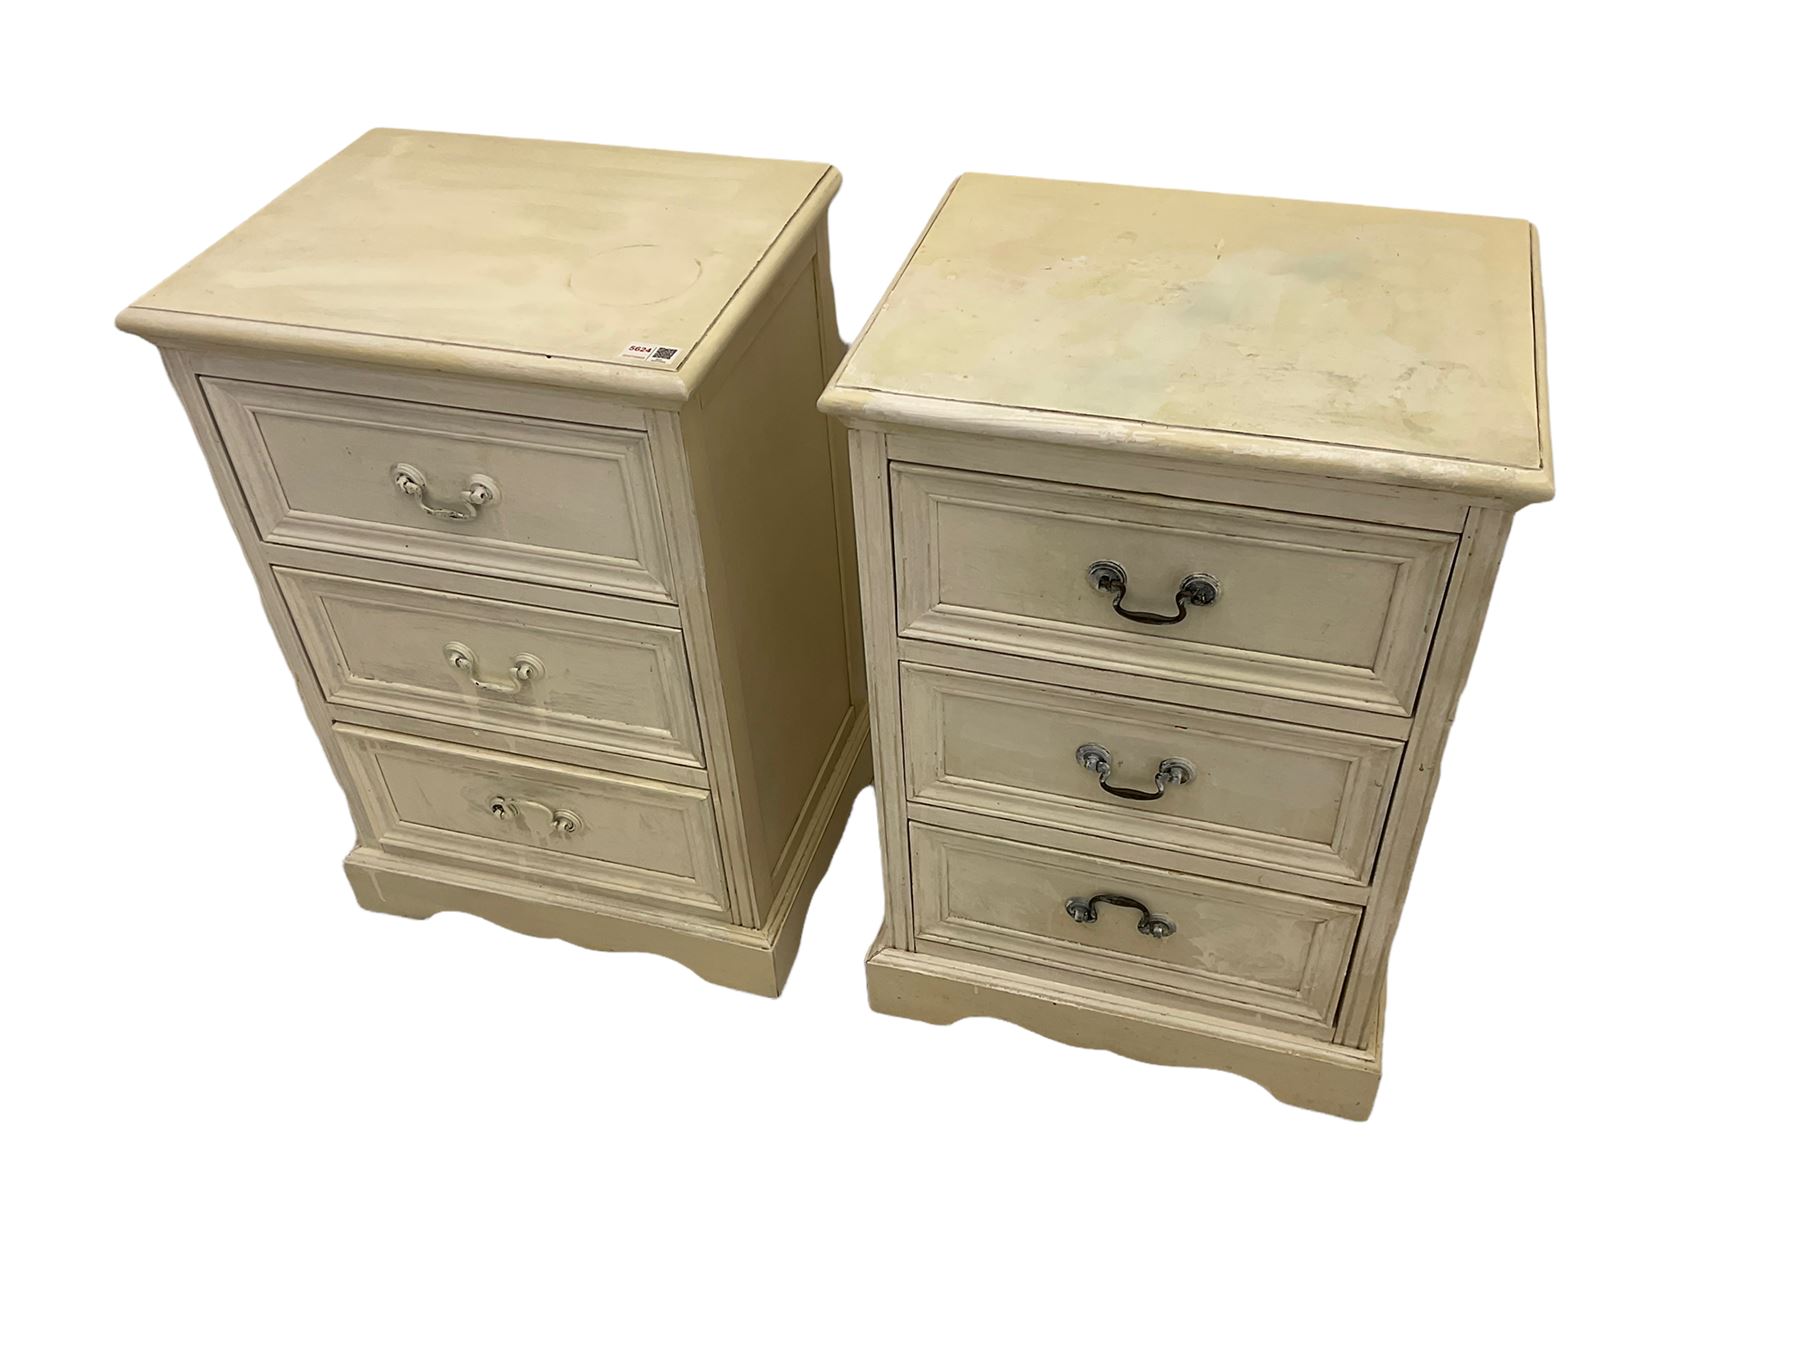 Pair of painted three drawer chest - Image 2 of 2